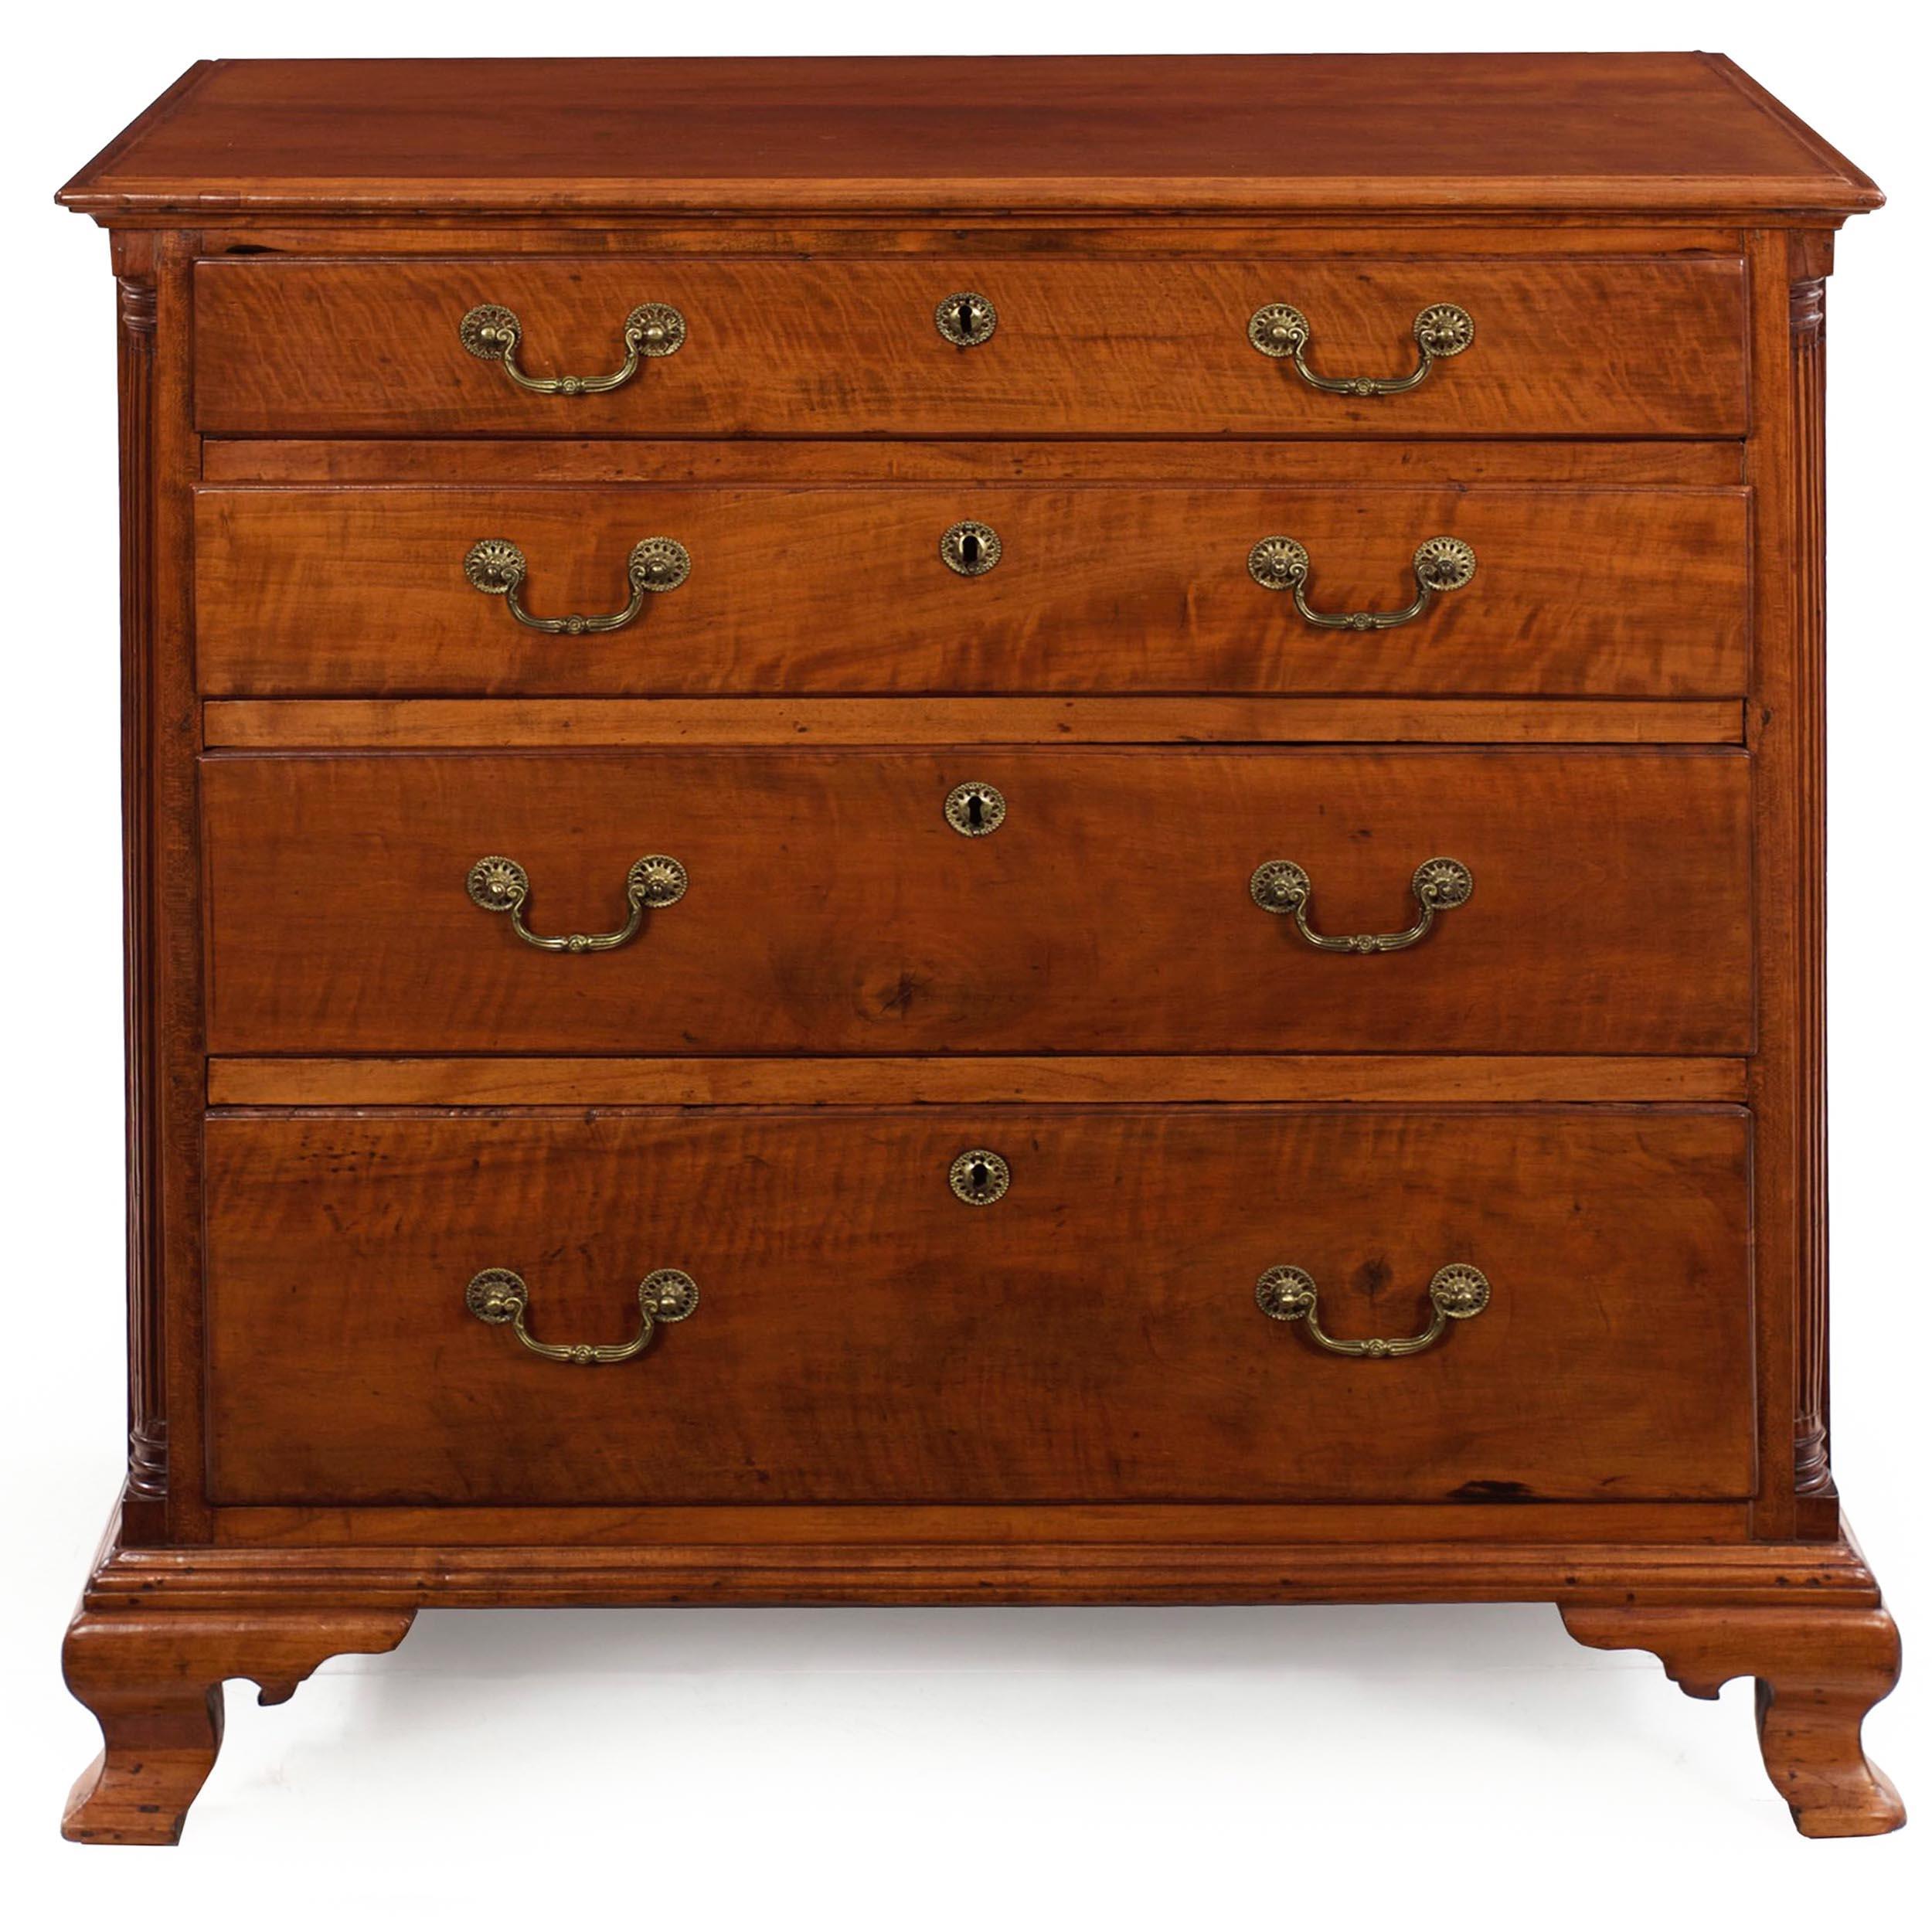 A product of the New England States from the last quarter of the eighteenth-century, this very attractive Chippendale chest of drawers features solid figured maple primary woods finished in a glowing shellac. The top is crafted using two solid maple